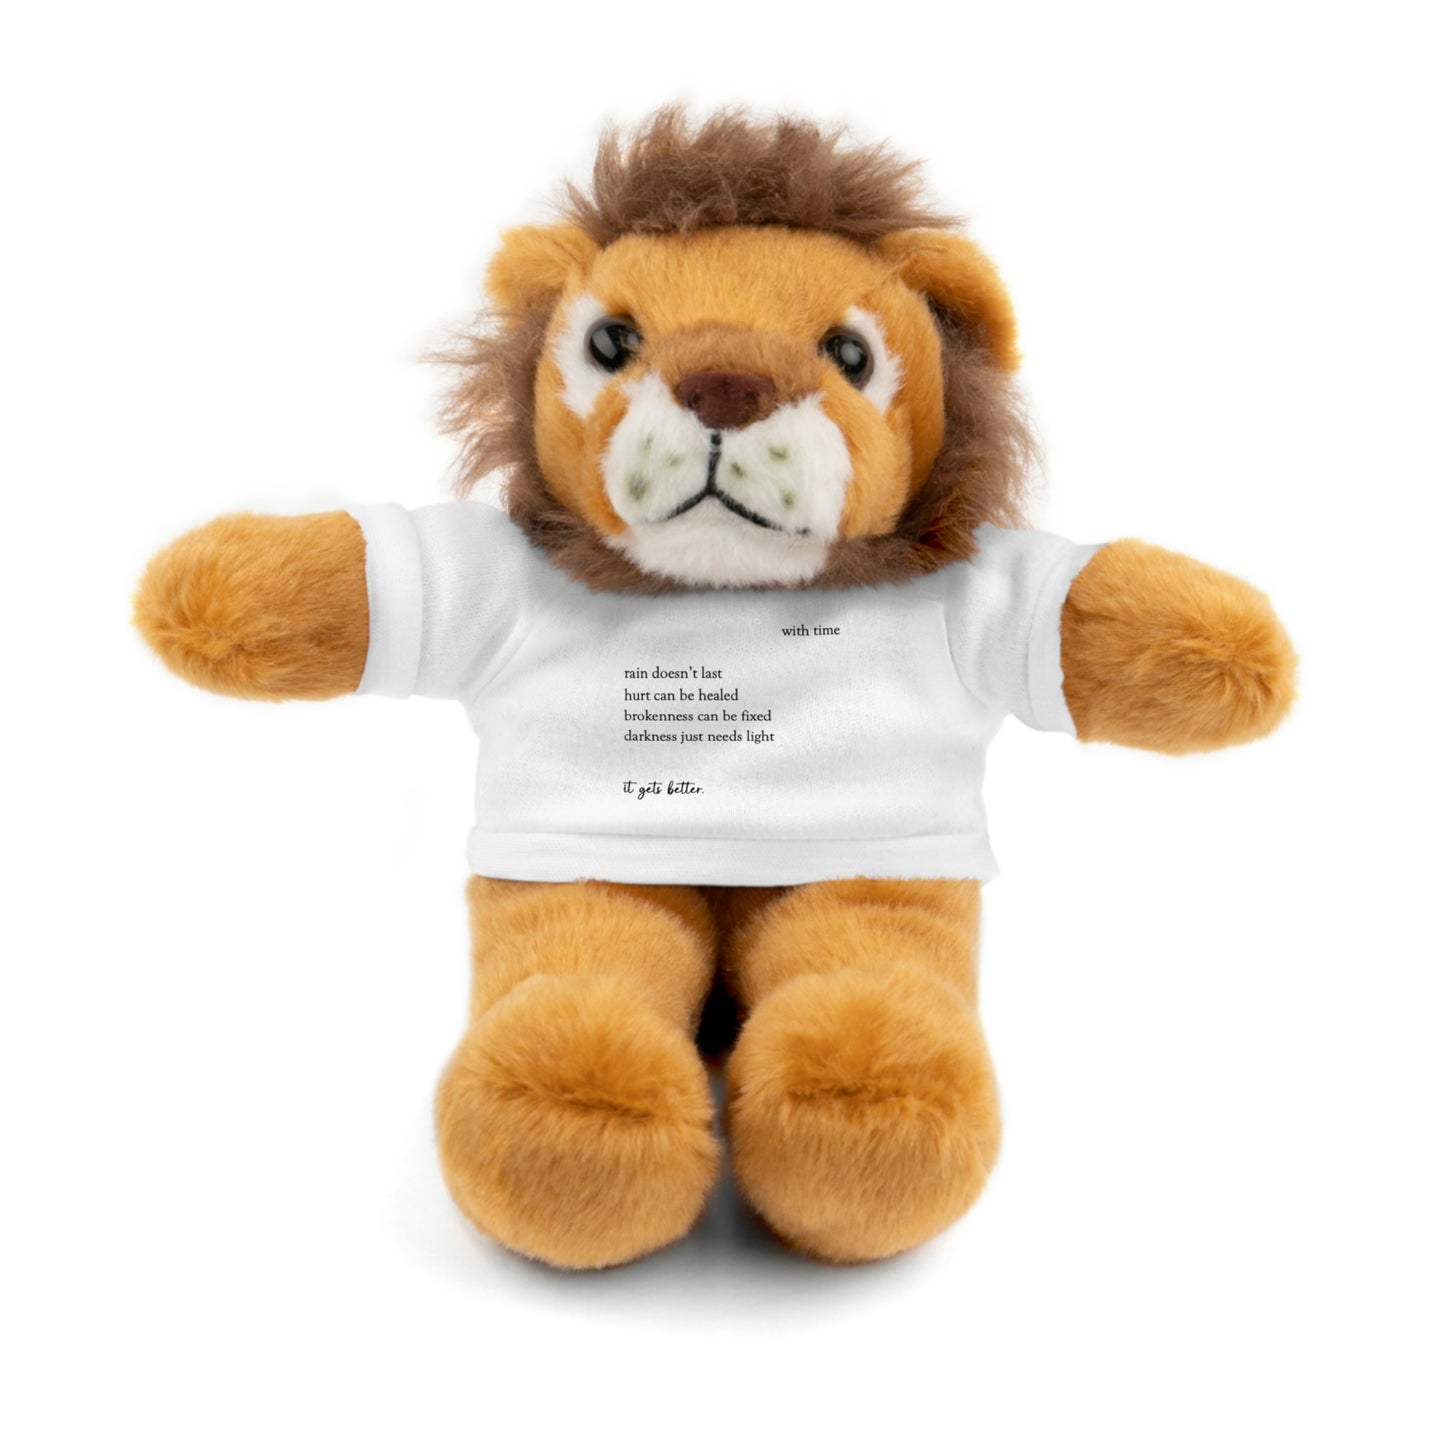 Stuffed Animals with "It Gets Better" Tee